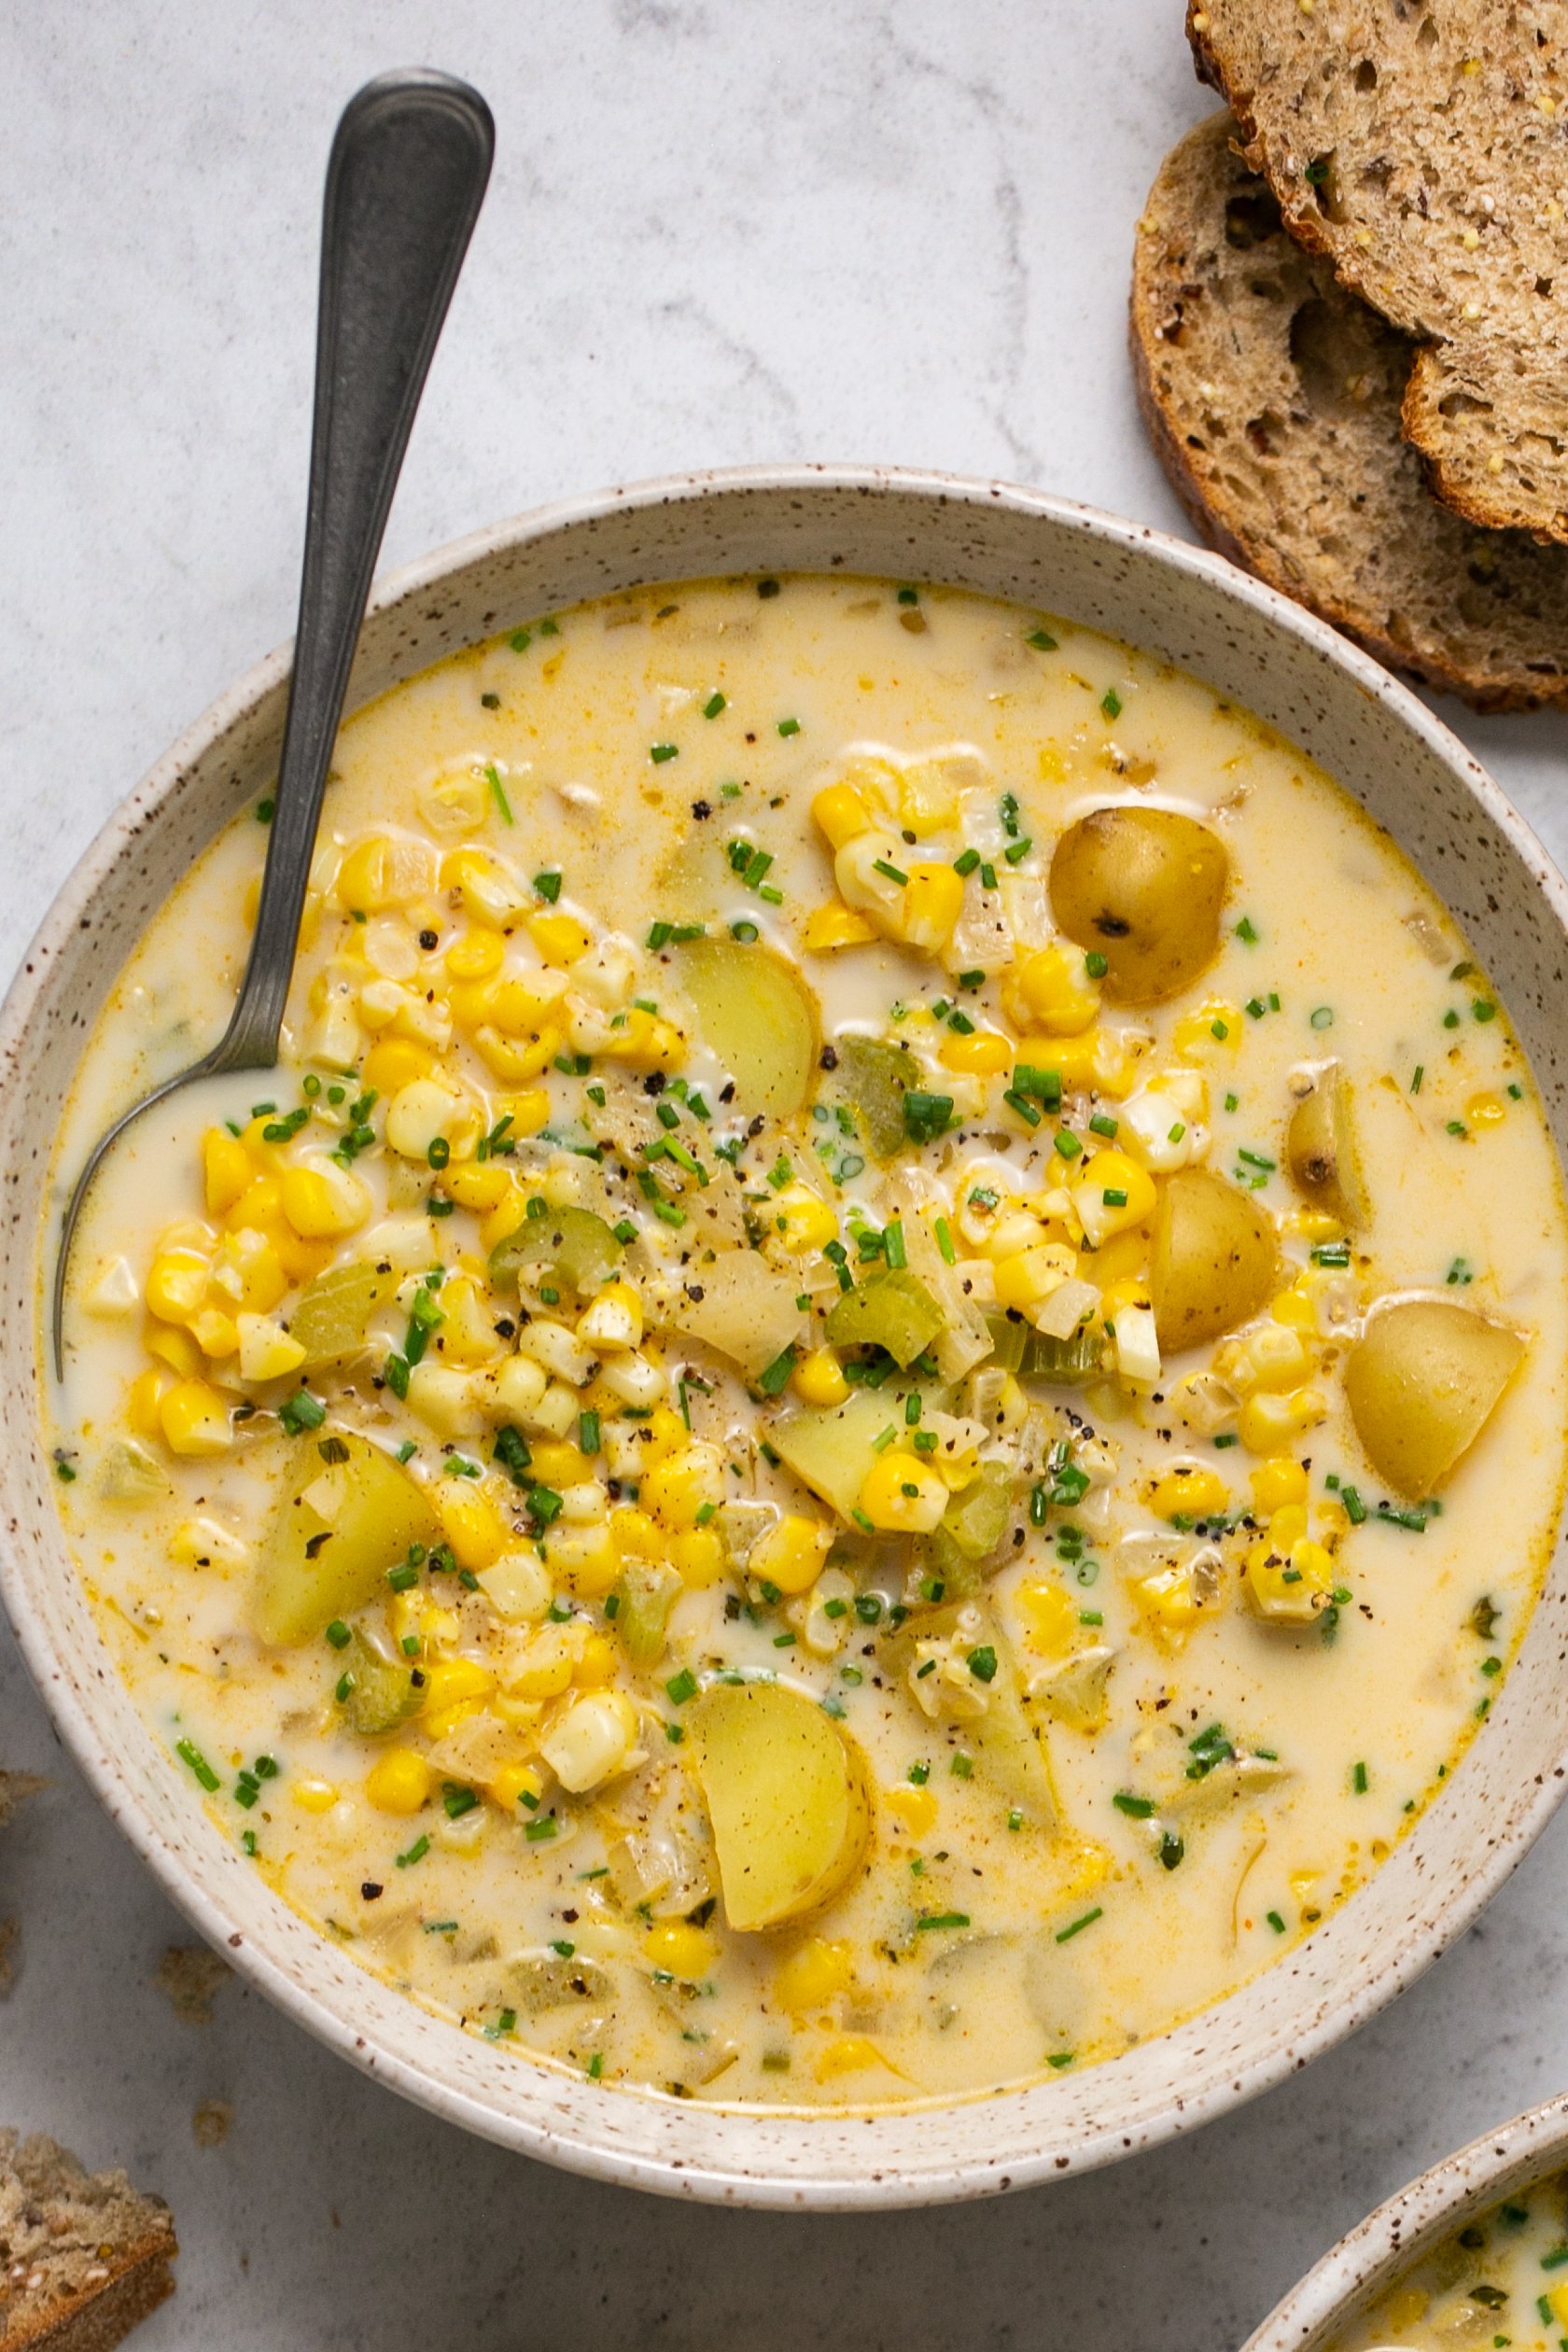 A bowl of corn and potato chowder with a spoon. There are slices of bread next to the bowl.